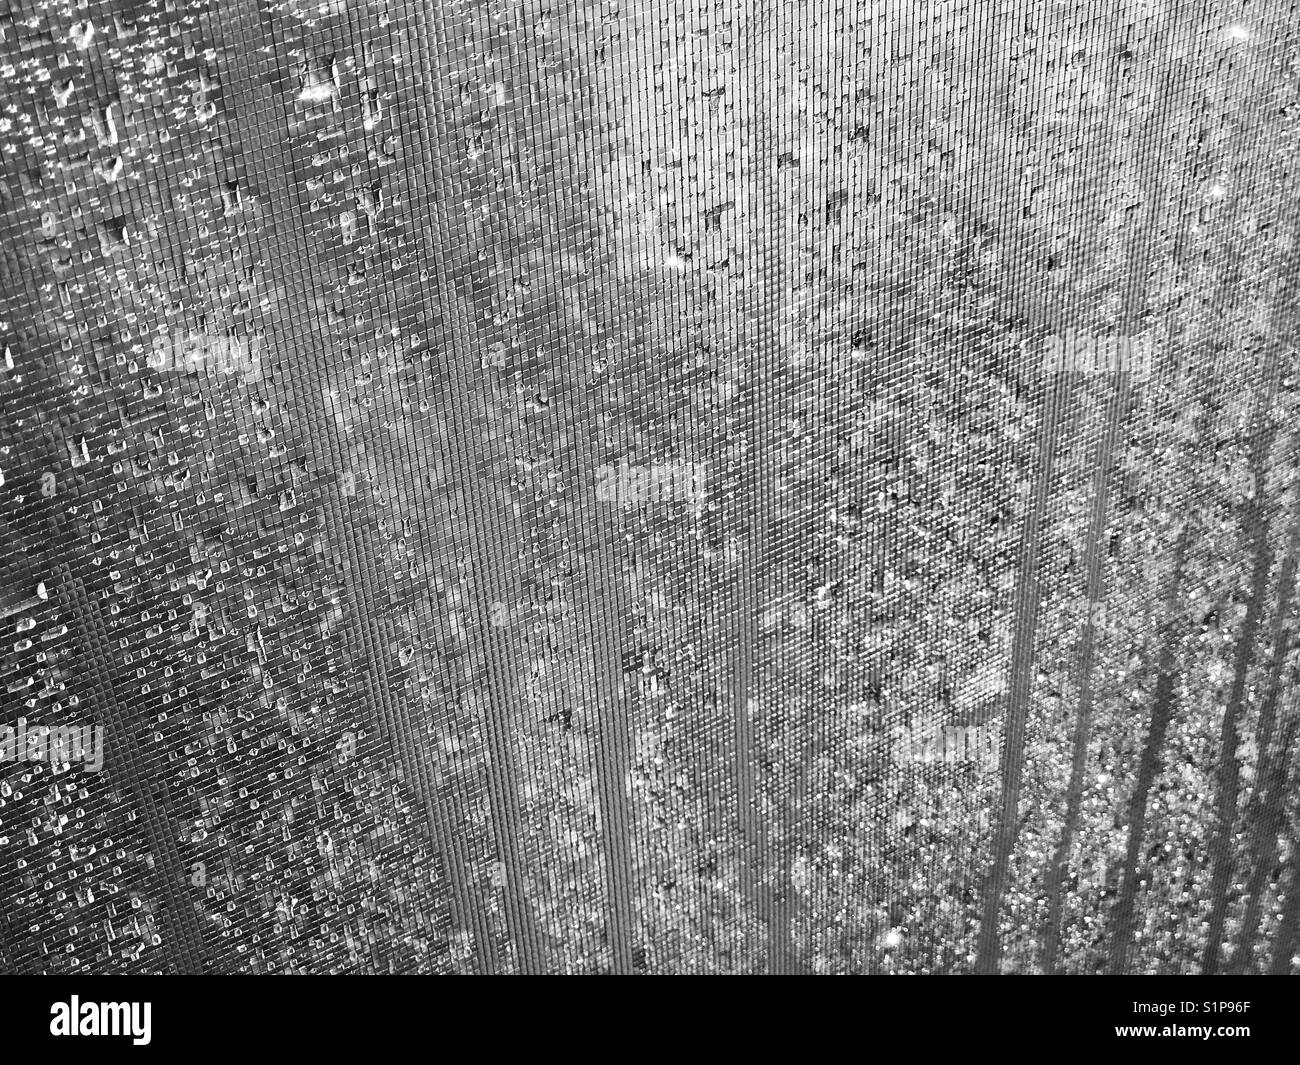 Abstract textures of water droplets on a window screen. Stock Photo